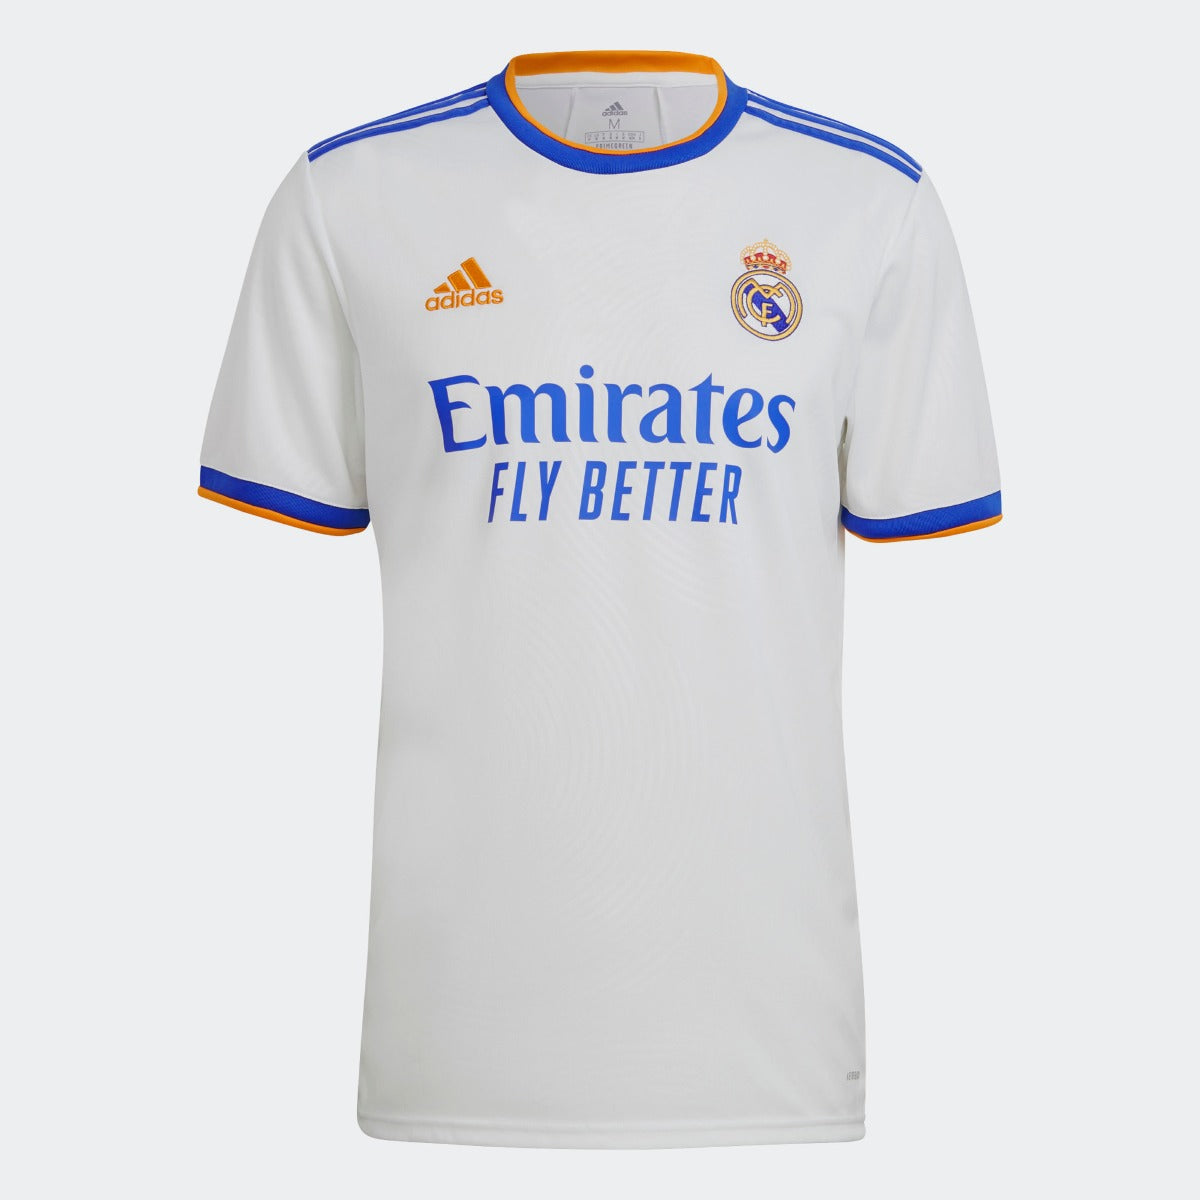 Real Madrid - La LigaReal Madrid's new shirt includes a hand-painted  optical dragon - Adidas and Human Race have launched a new